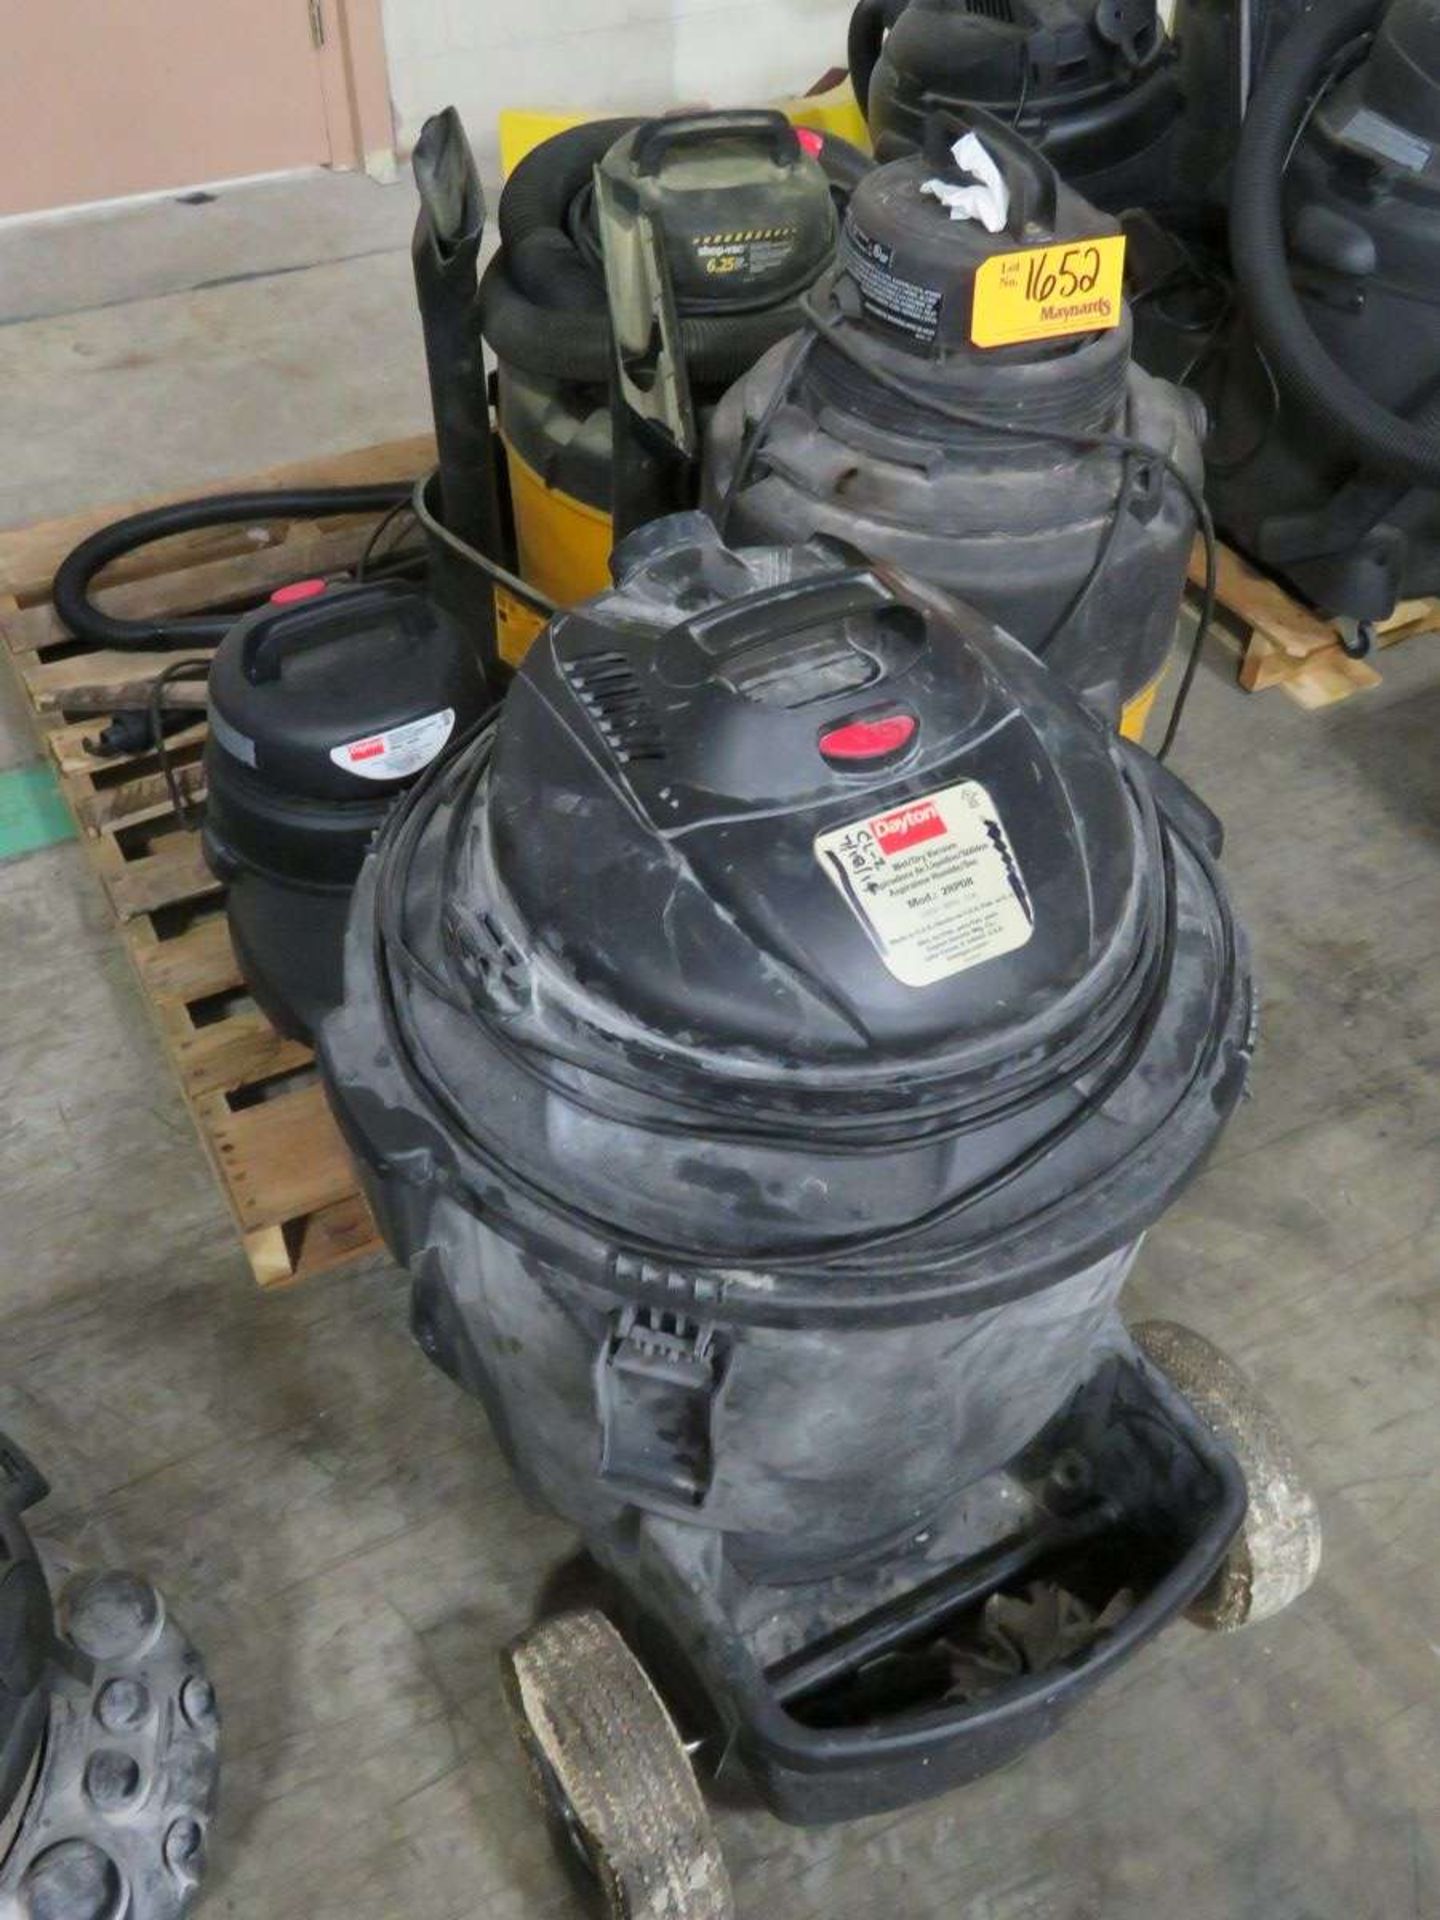 (4) Assorted Wet/Dry Electric Shop Vacuums